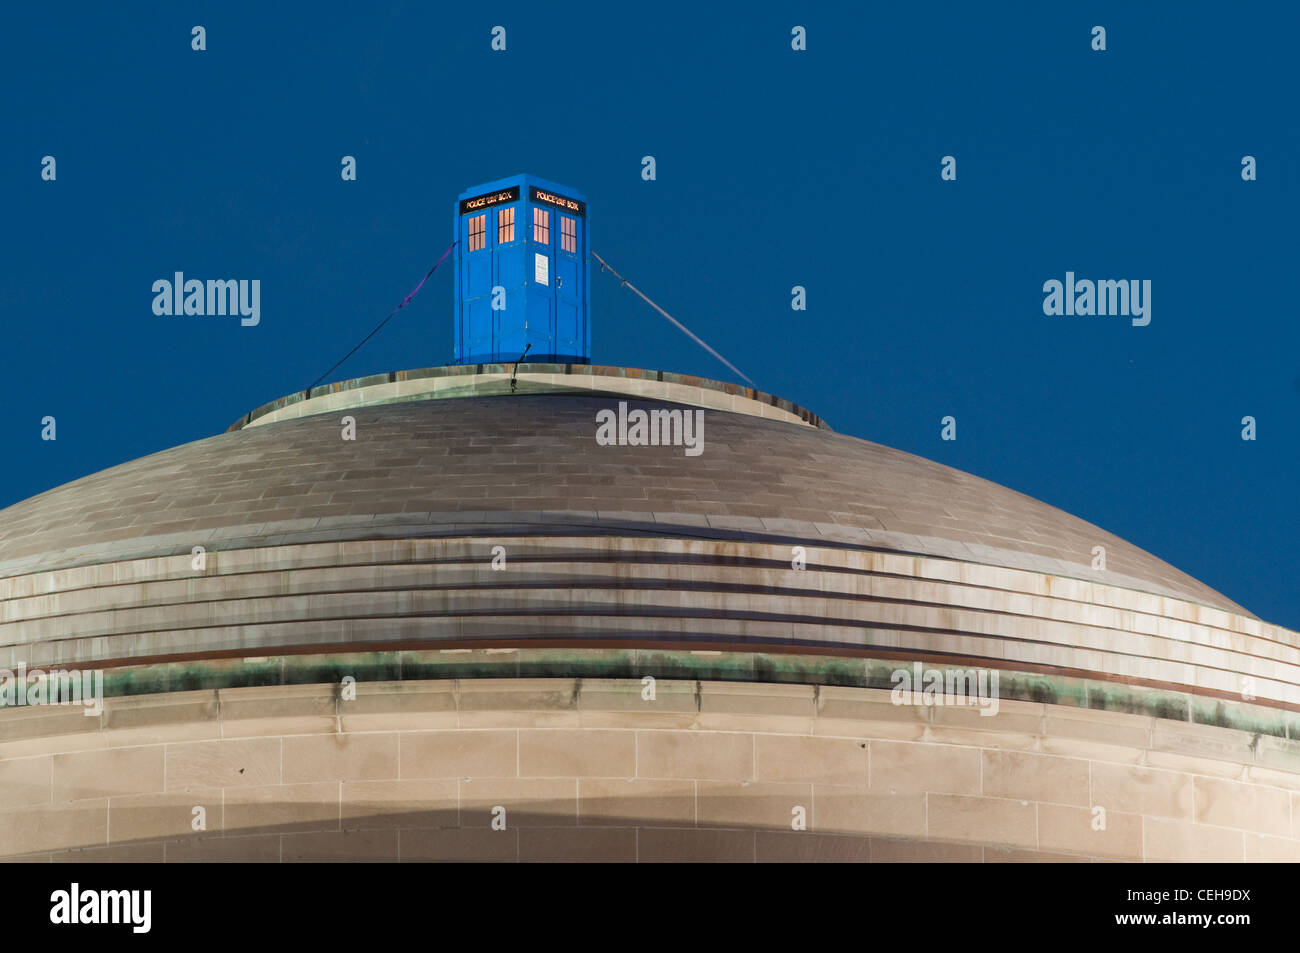 On 8/30/10, an illuminated 'Doctor Who'-style police call box ('TARDIS') appeared on MIT's Great Dome -- it was the same TARDIS that had been on the roof of Building 7 overlooking the 77 Mass Ave entrance for the beginning of Rush/Freshman Orientation. Stock Photo